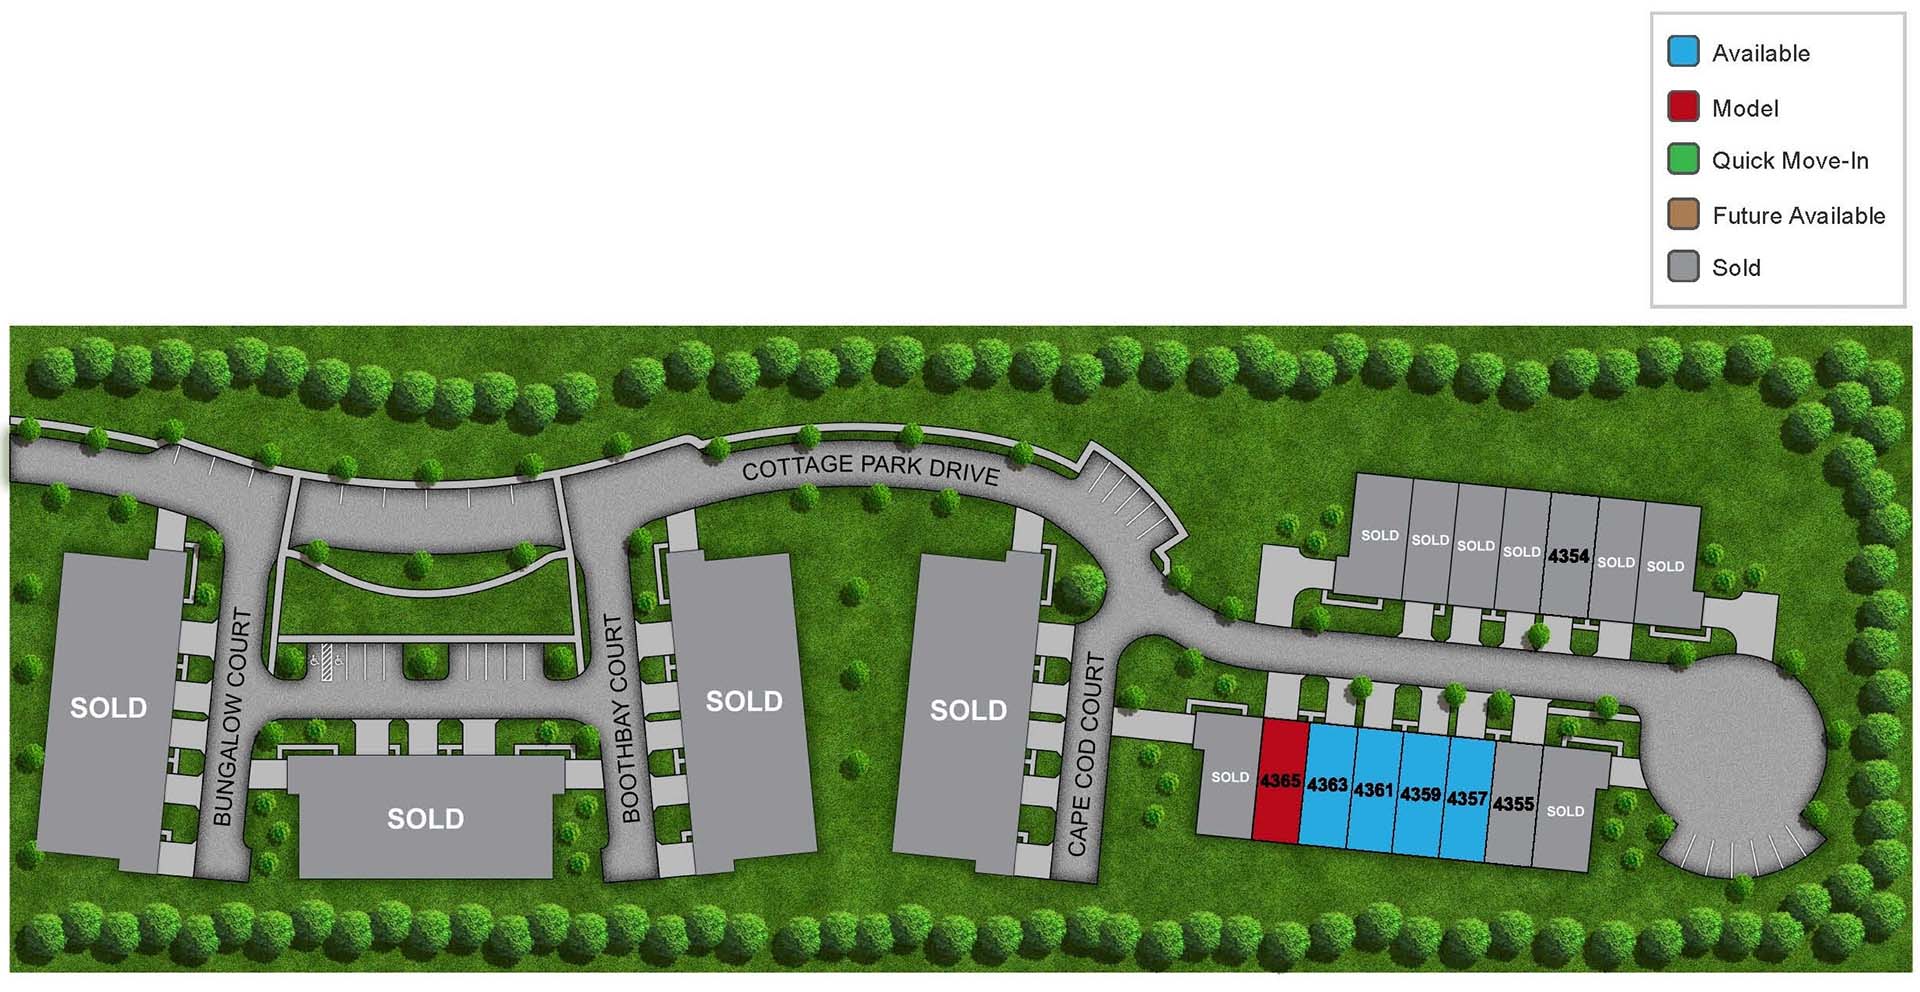 Cottages of Beavercreek site map, sold and available properties